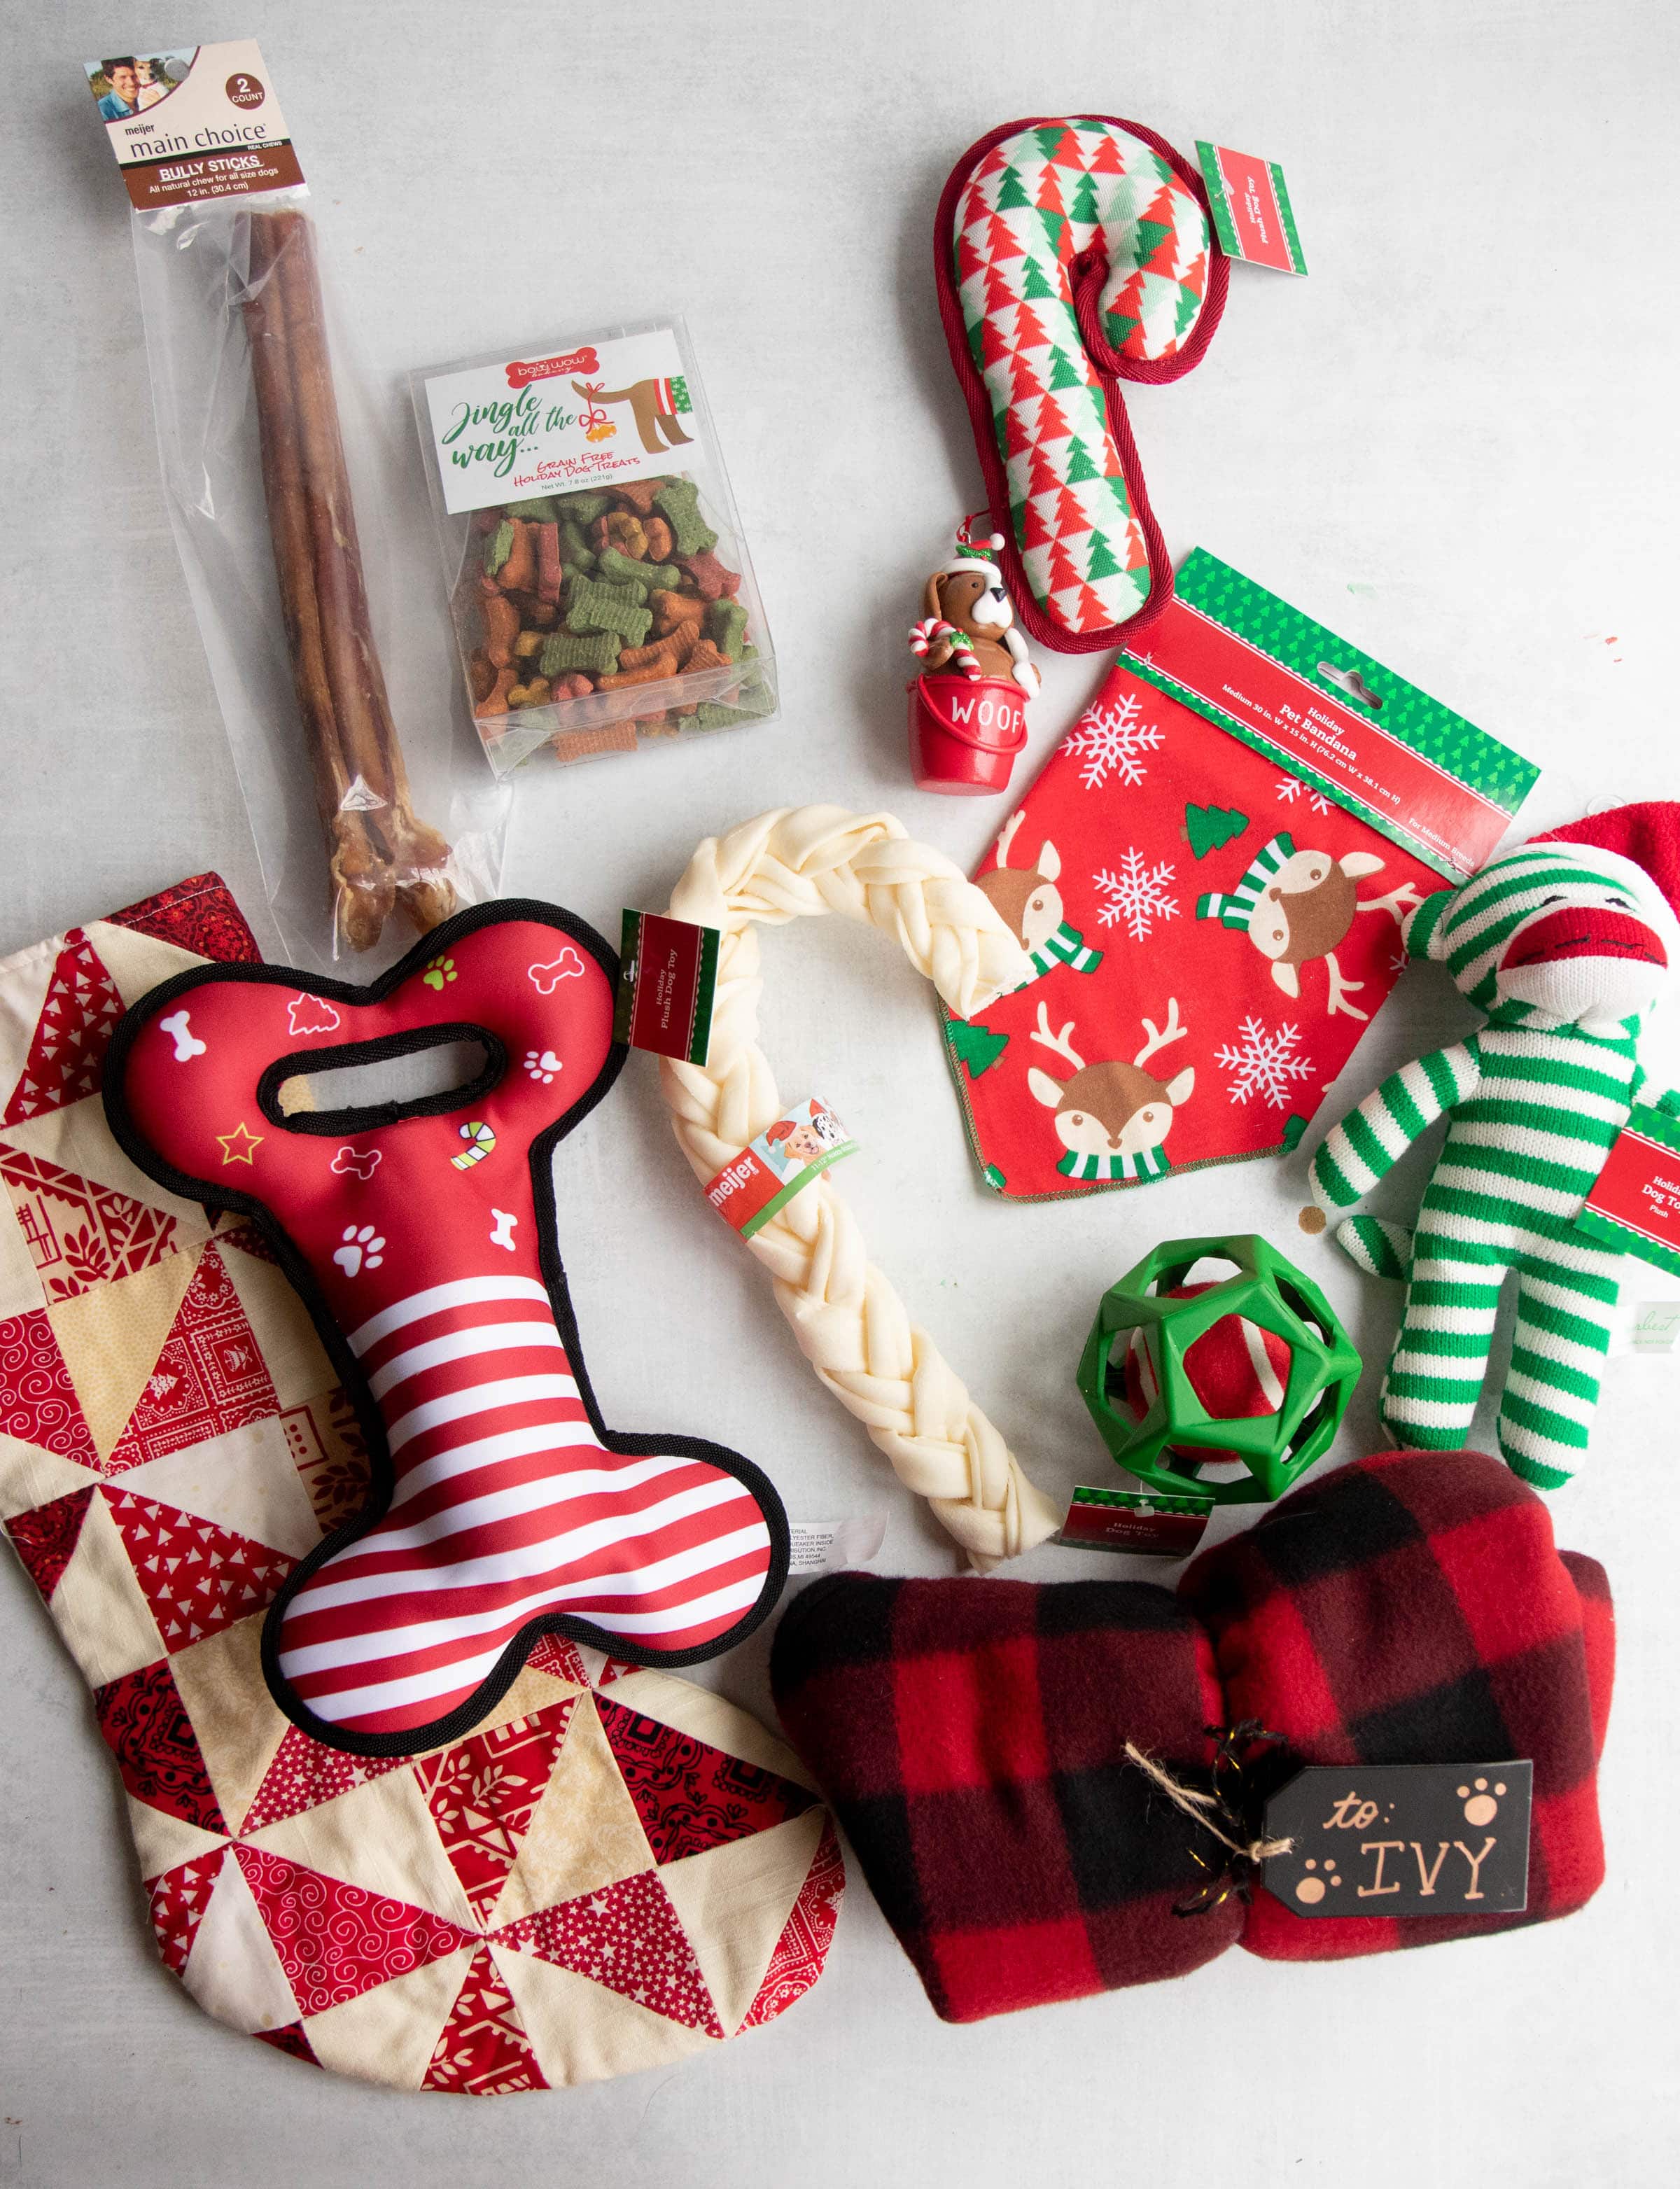 Stocking fillers for a dog - toys, treats, a red and white stocking, and a custom dog coat